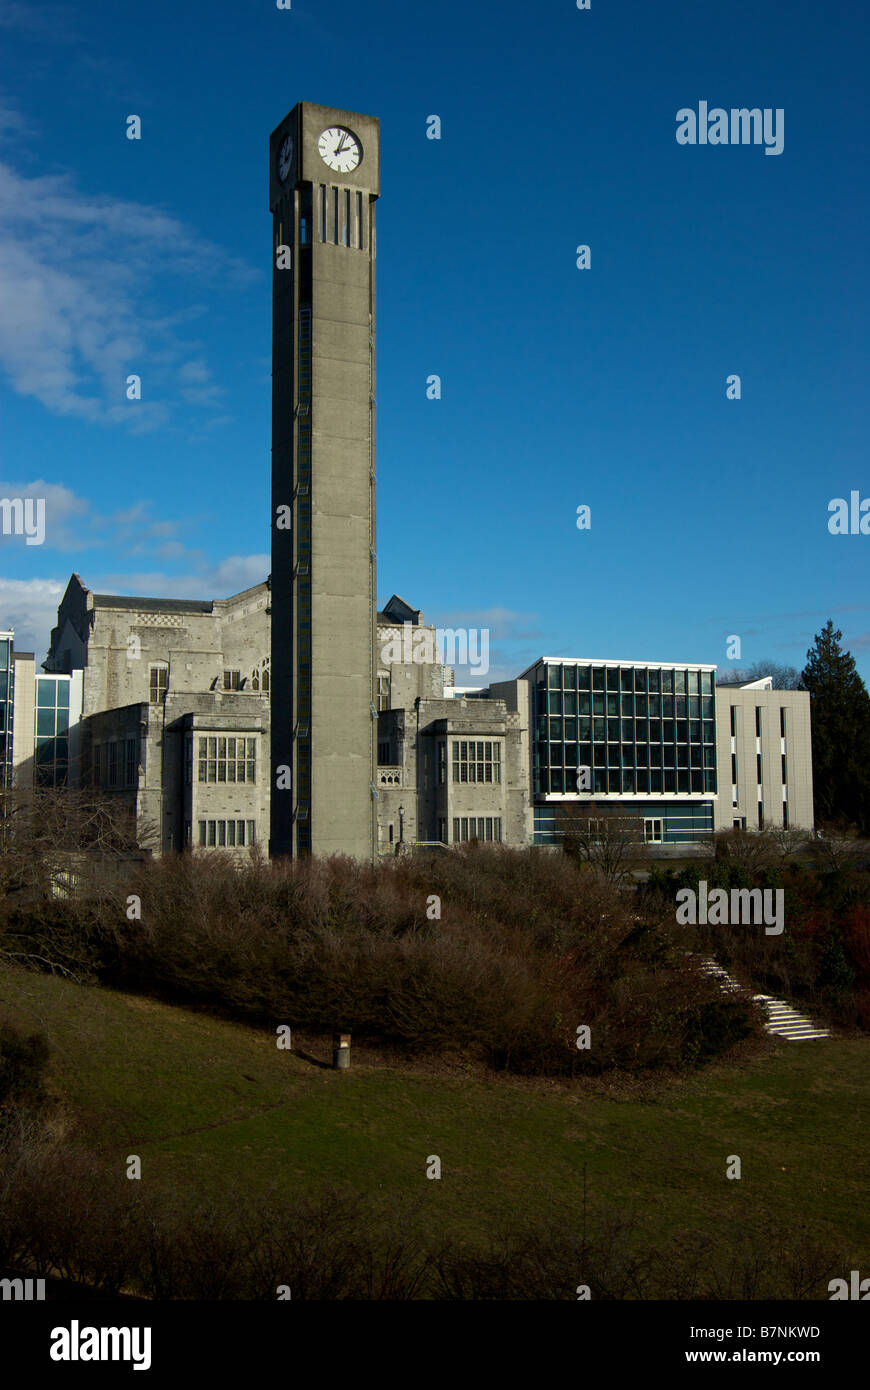 Ladner clock tower in front of main library on UBC Campus Stock Photo